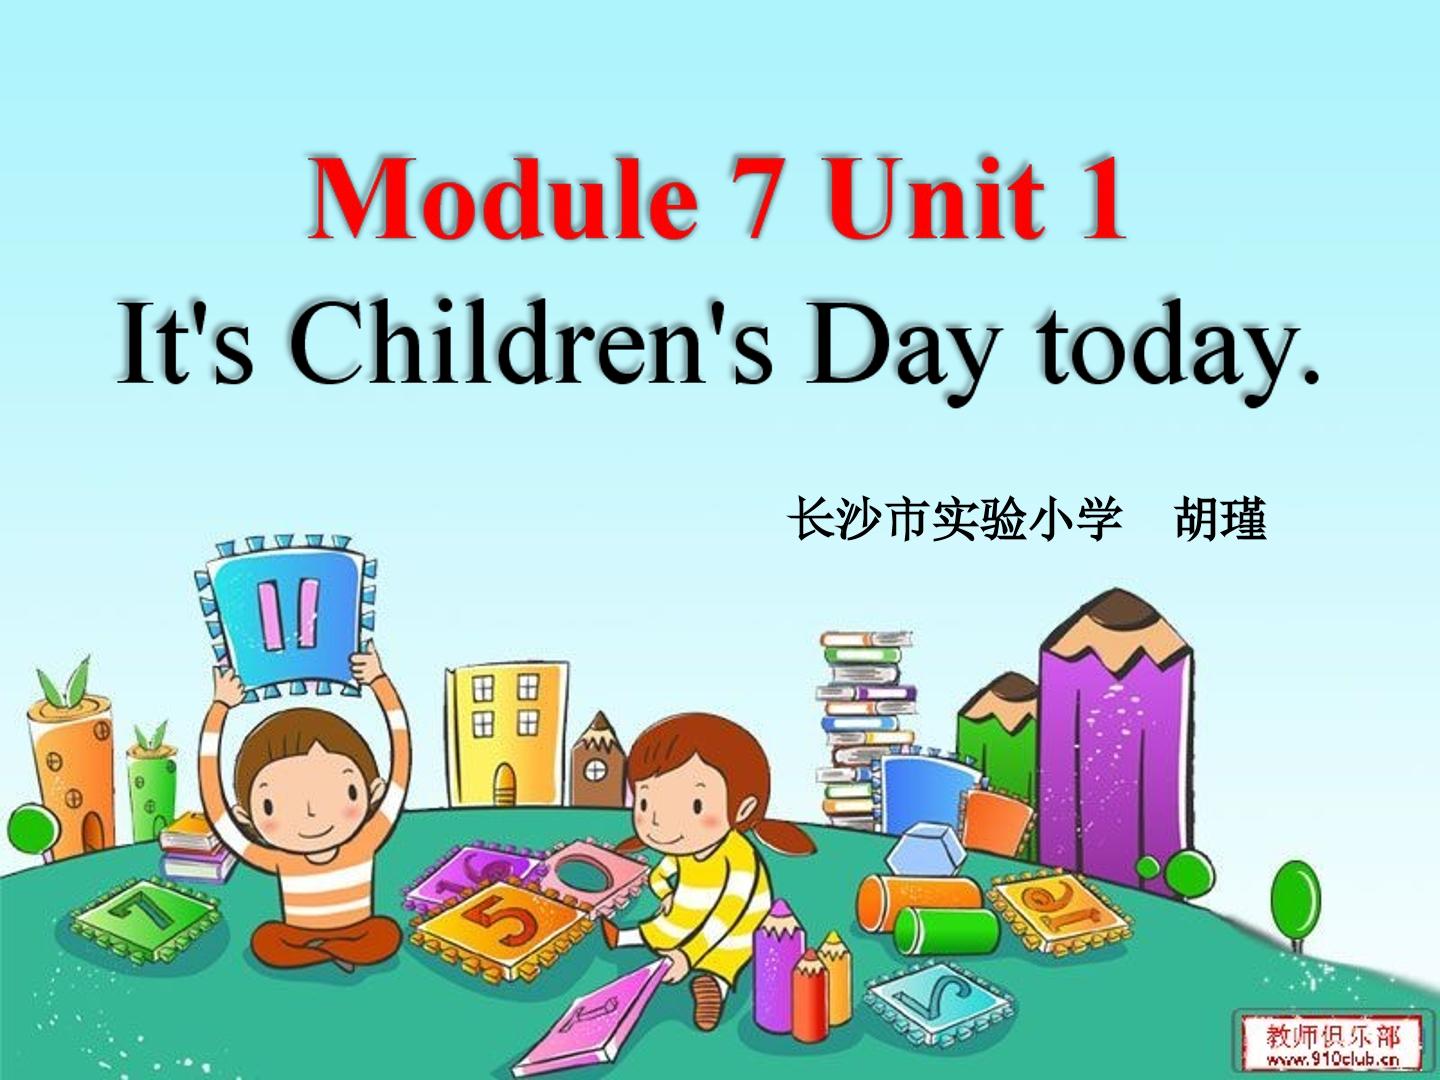 Unit 1 It's Children's Day today.